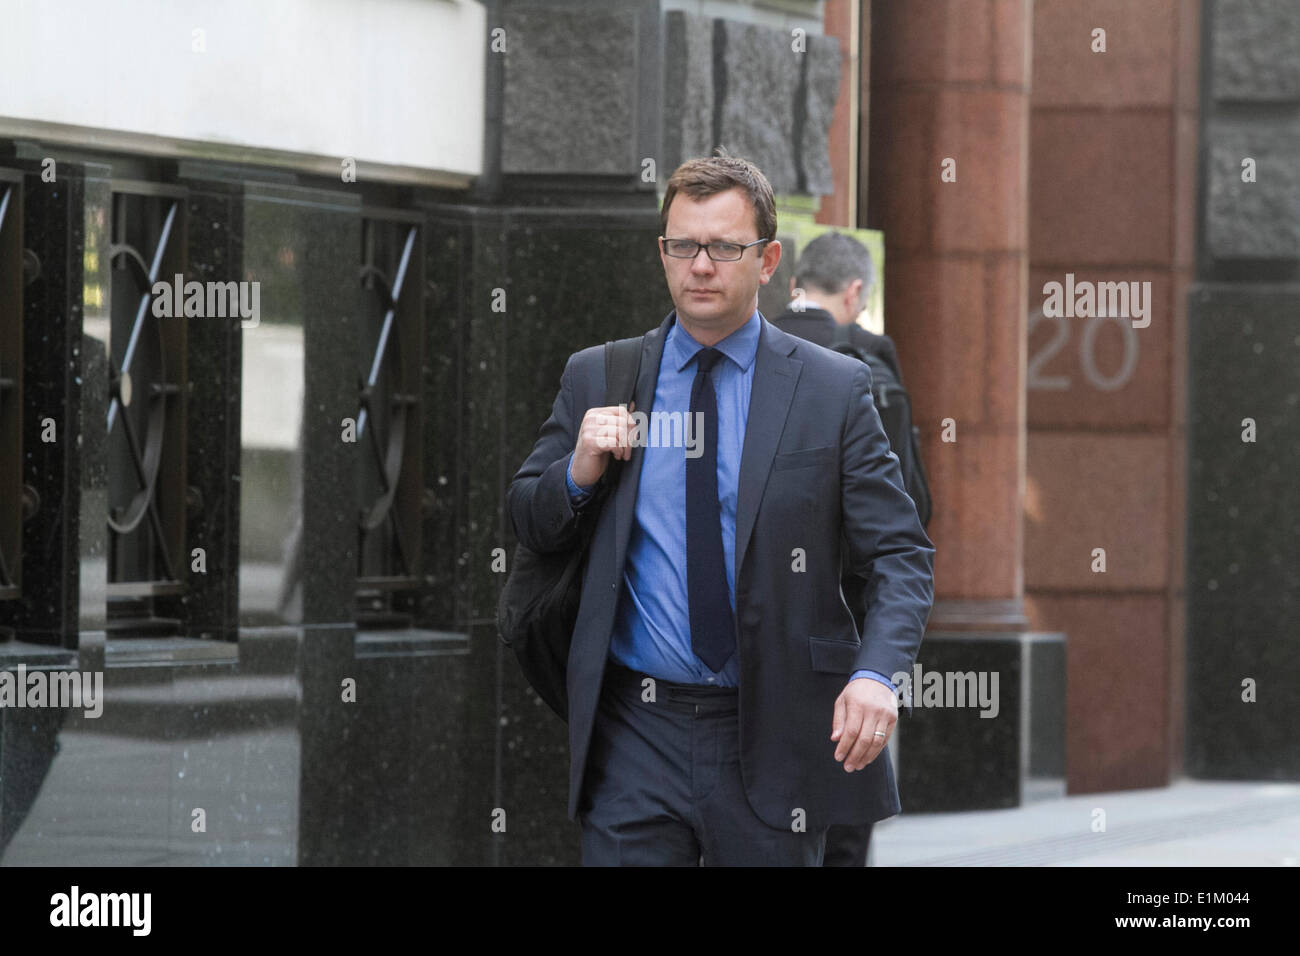 London UK. 6th June 2014. Former Director of communications at Downing Street and News of the World editor Andy Coulson  arrives at the Old Bailey as  the judge starts summing up after 7 months. Rebekah Brooks and other defendants including husband Charlie Brooks, Andy Coulson, Ian Edmonson, Clive Goodman;Cheryl Carter, Stuart Kuttner and Mark Hanna are charged in conspiracy to intercept the voice mails of celebrities and victims of crime and members of the British Royal Family Credit:  amer ghazzal/Alamy Live News Stock Photo